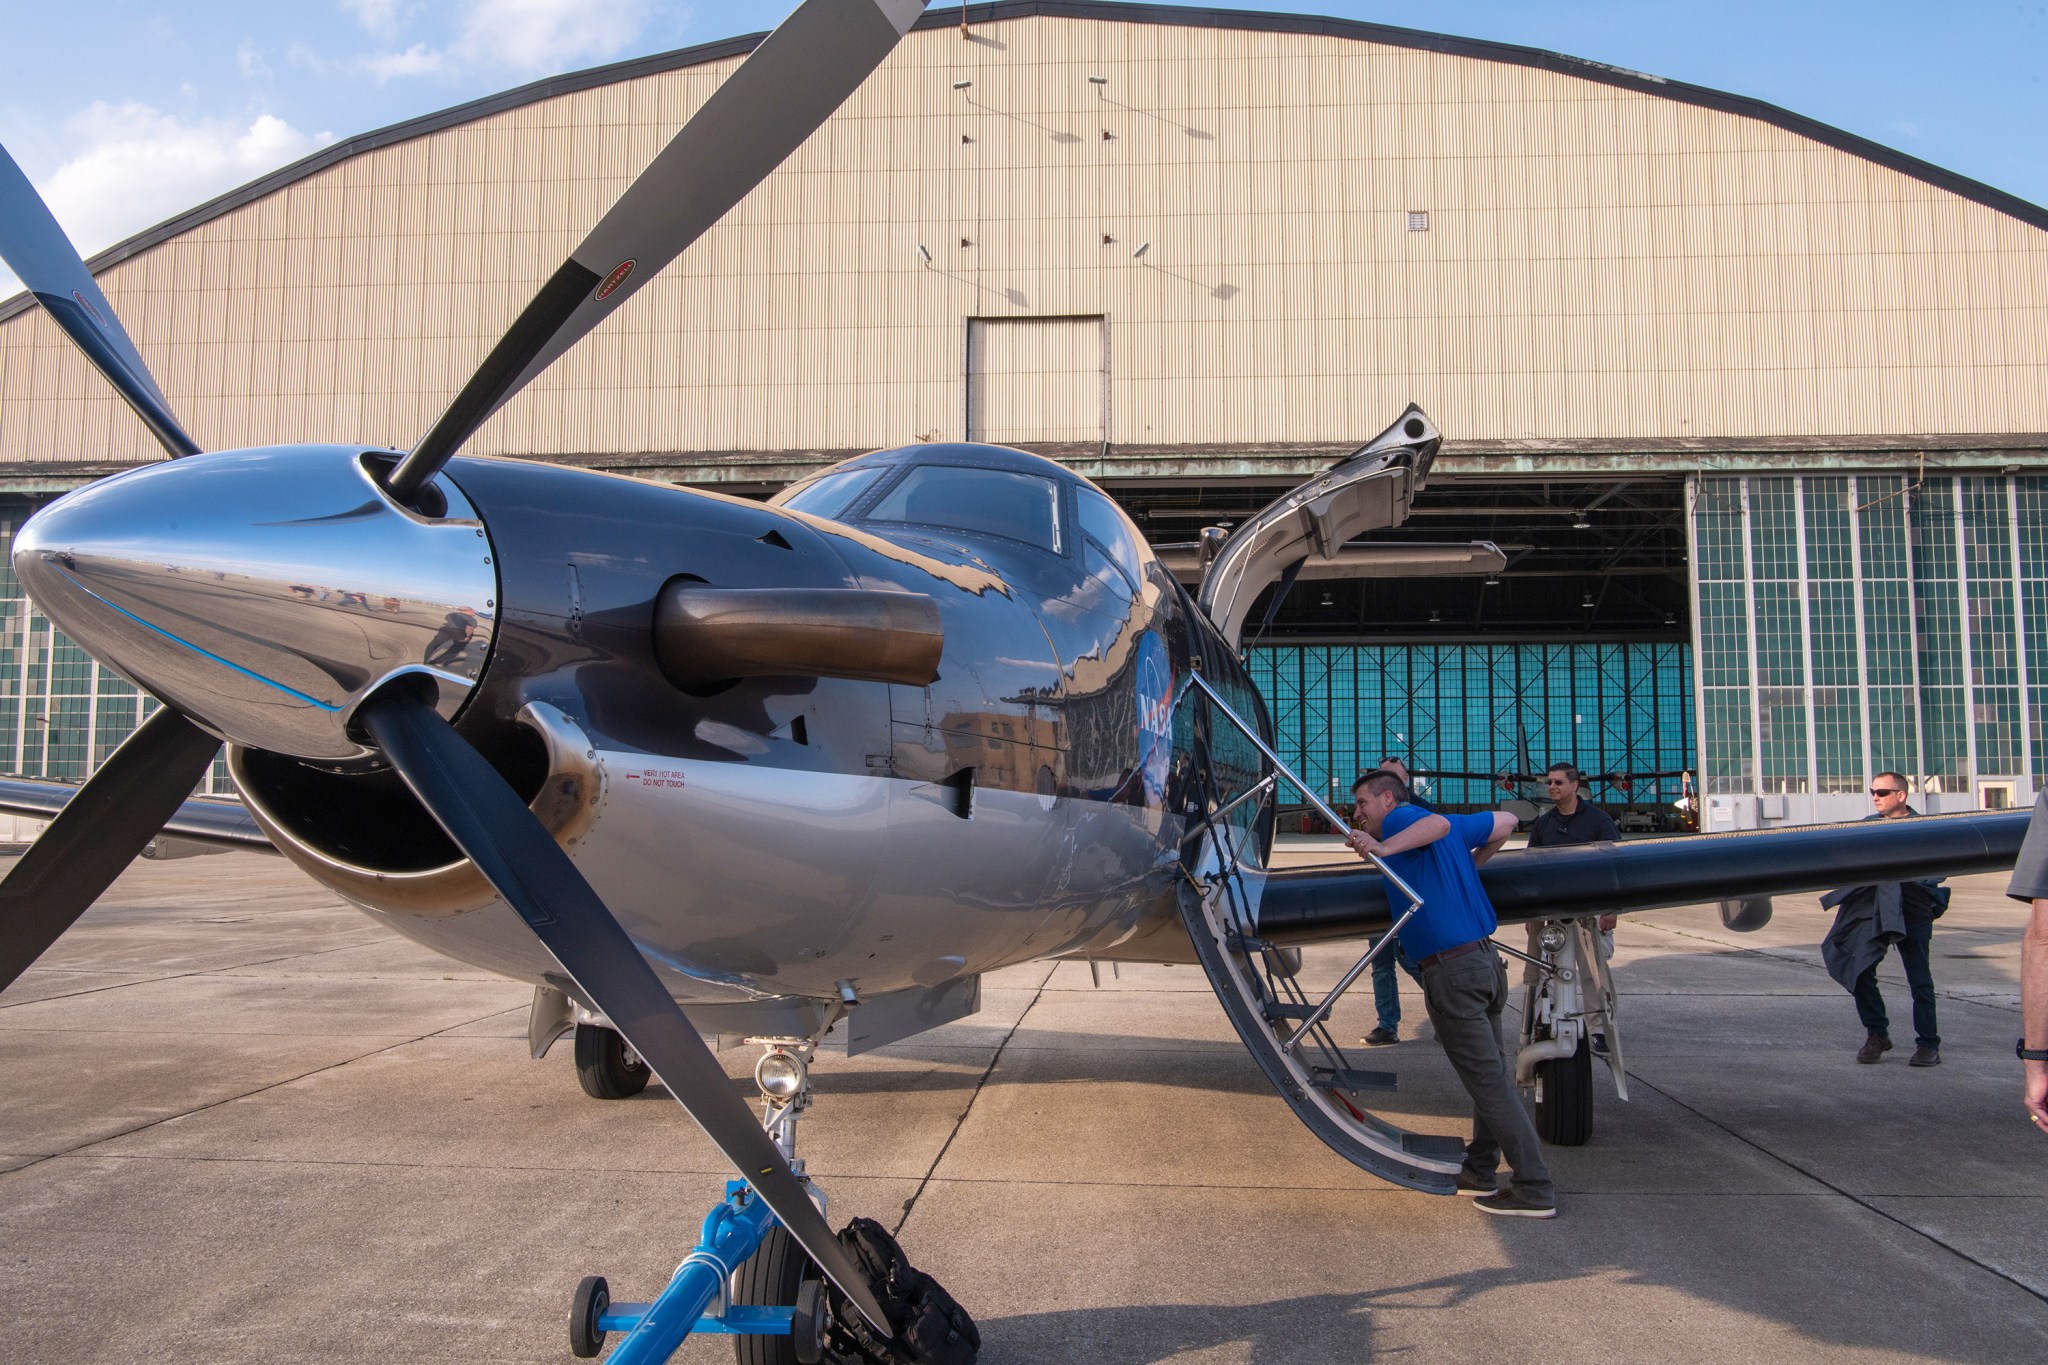 Man in blue shirt looks inside an aircraft from the drop-down steps. The aircraft sits in front of a large hangar building.